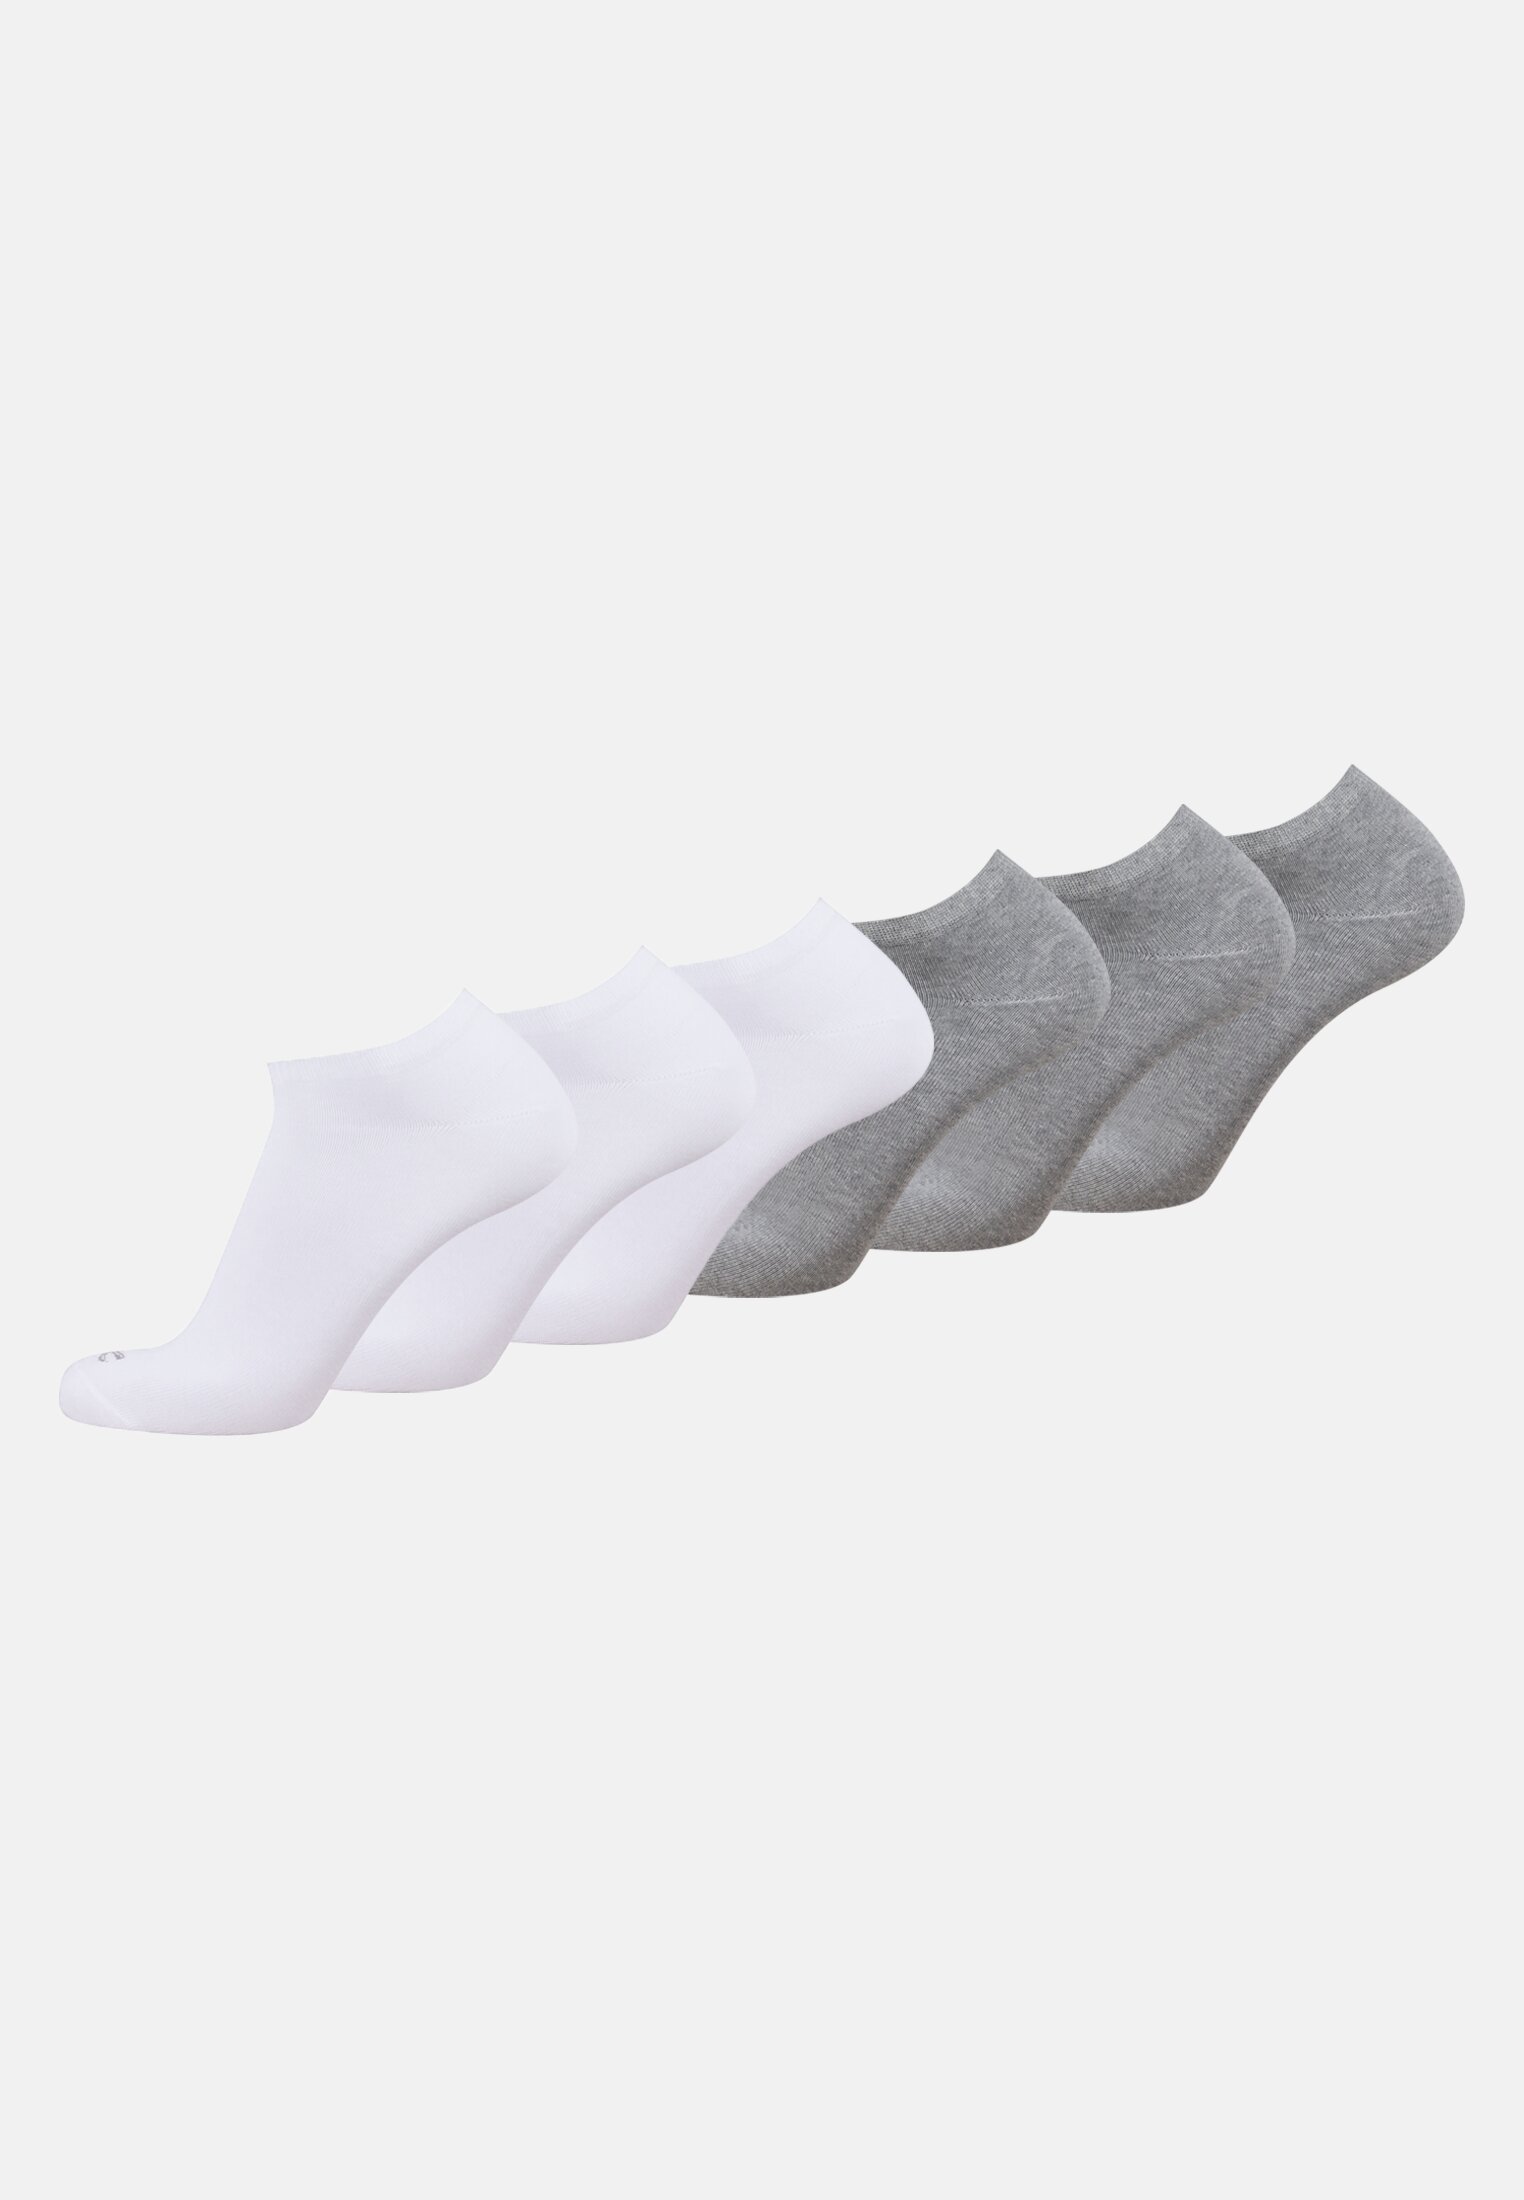 Camel Active Sneaker socks in a pack of 6